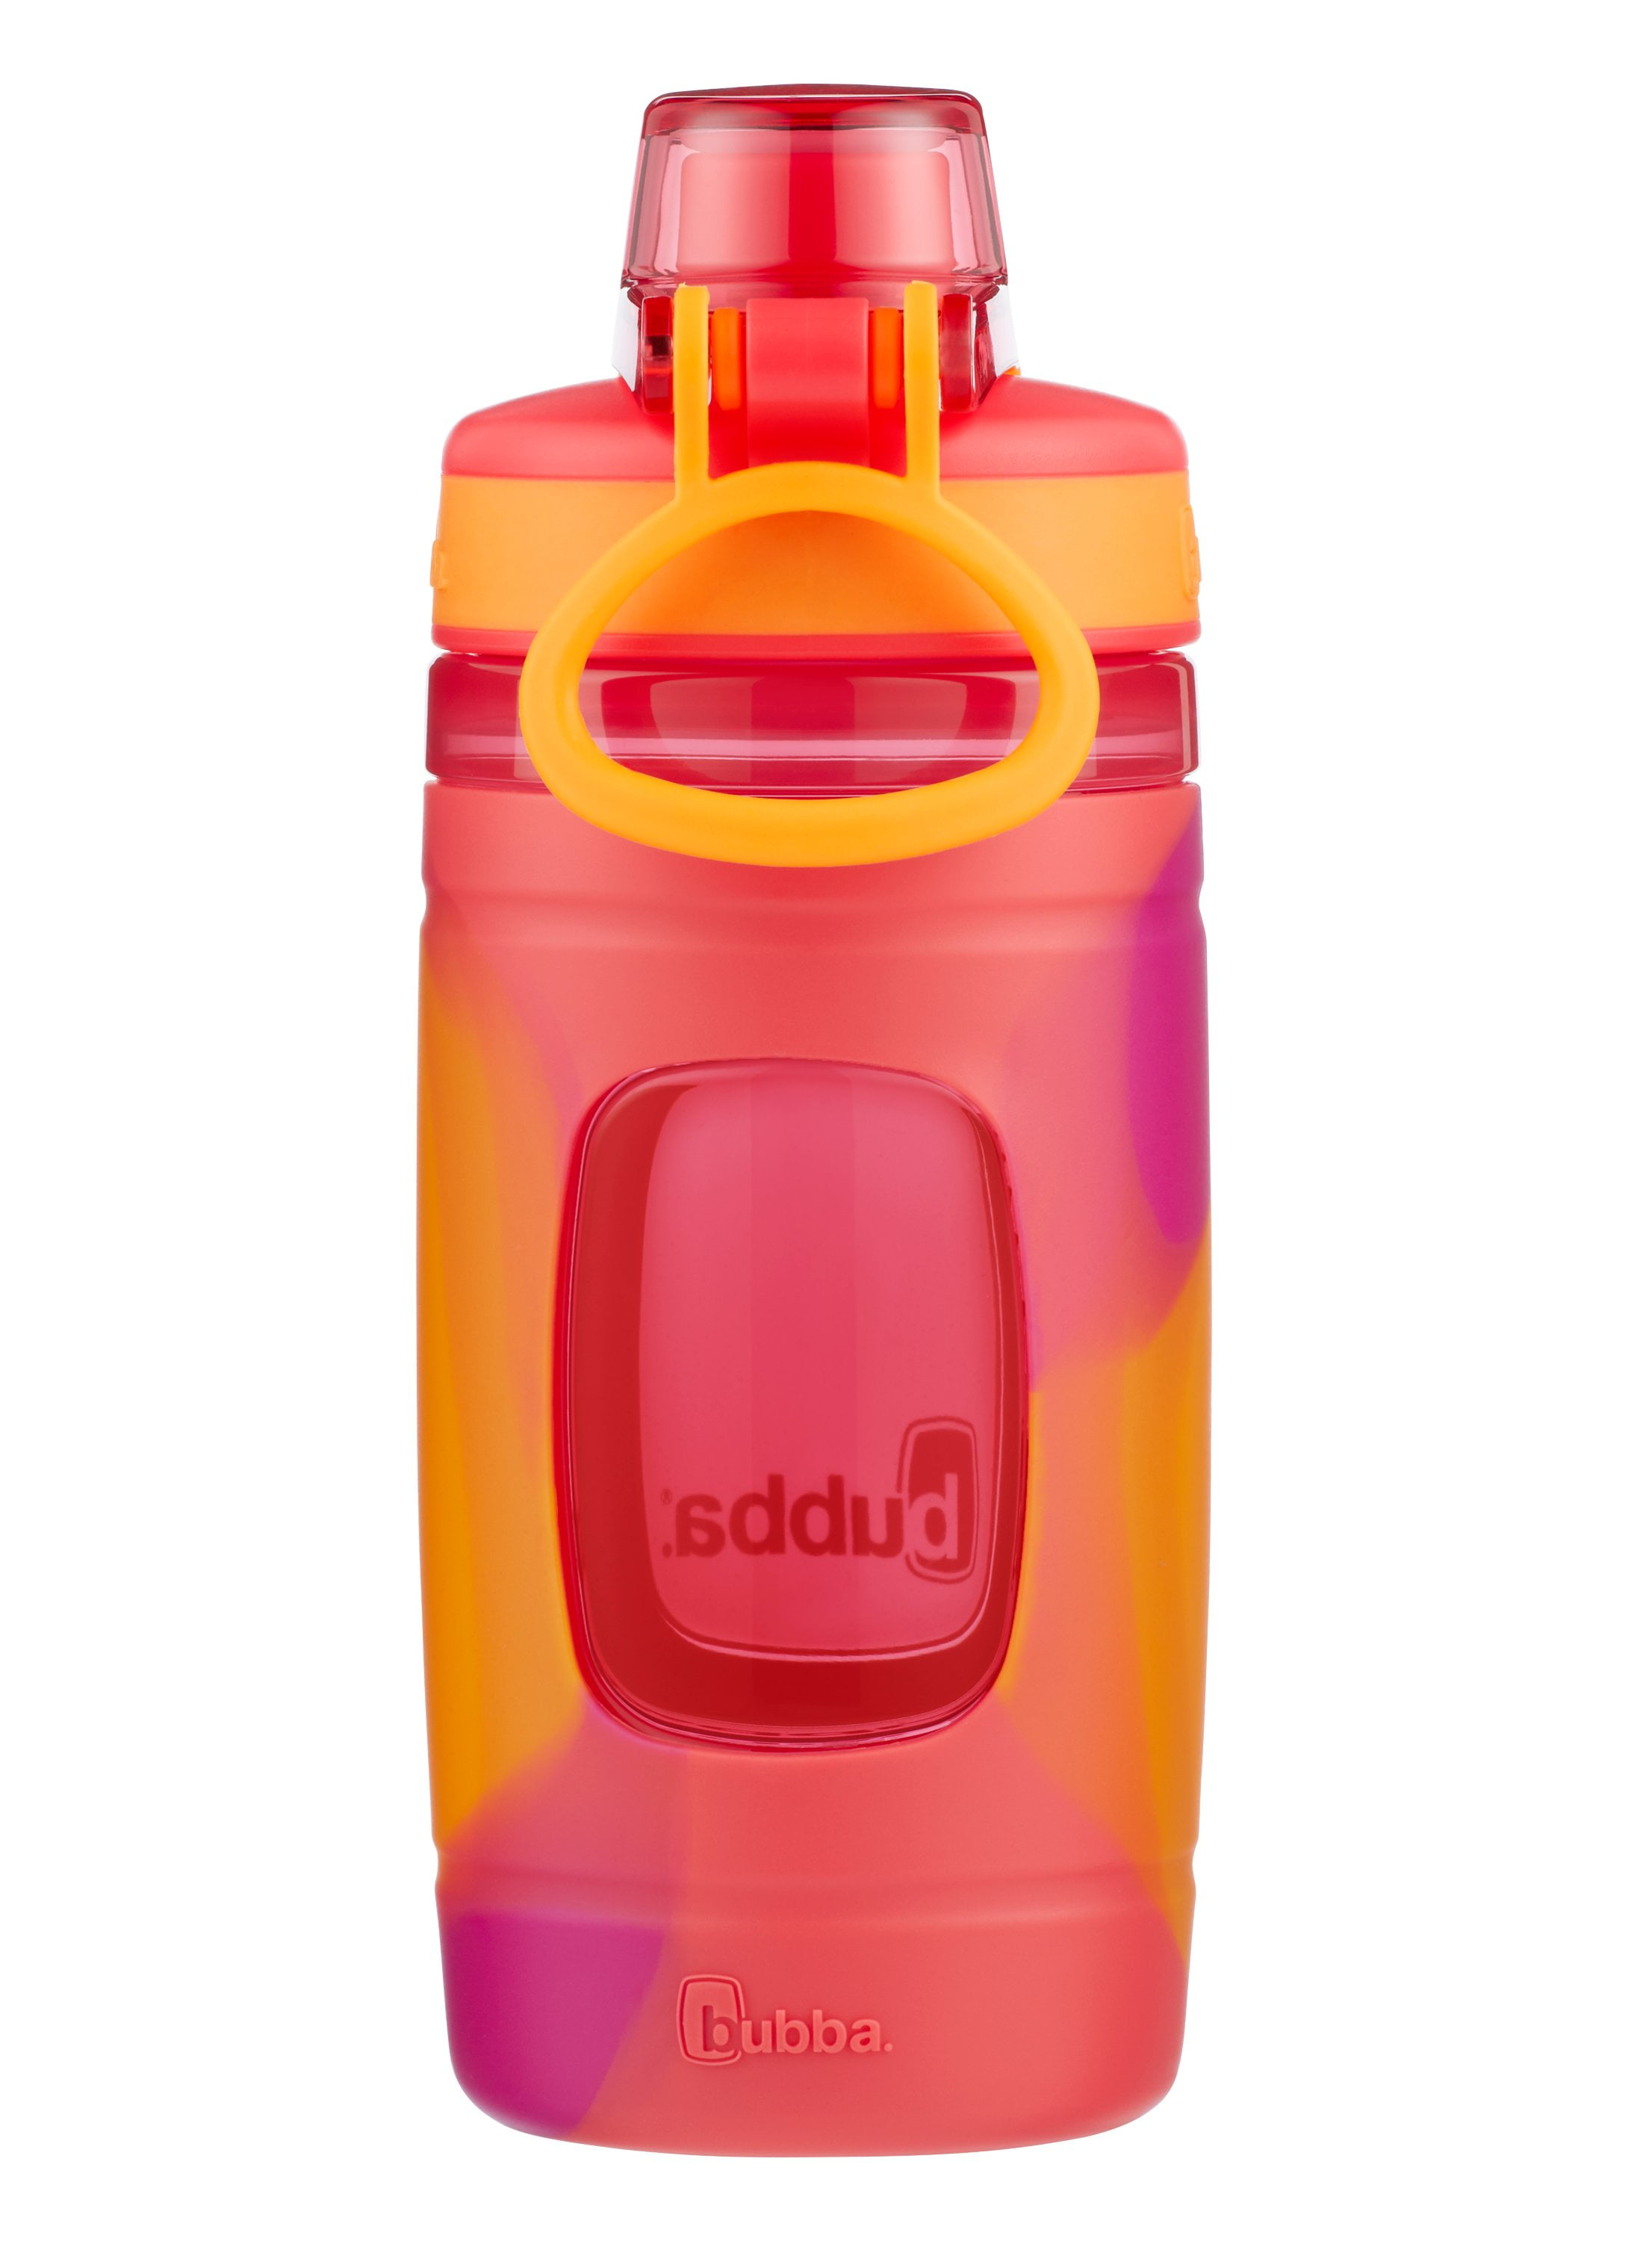 Bubba Flo Kid's 16 Oz. Water Bottle 2-pack - Island Teal/electric